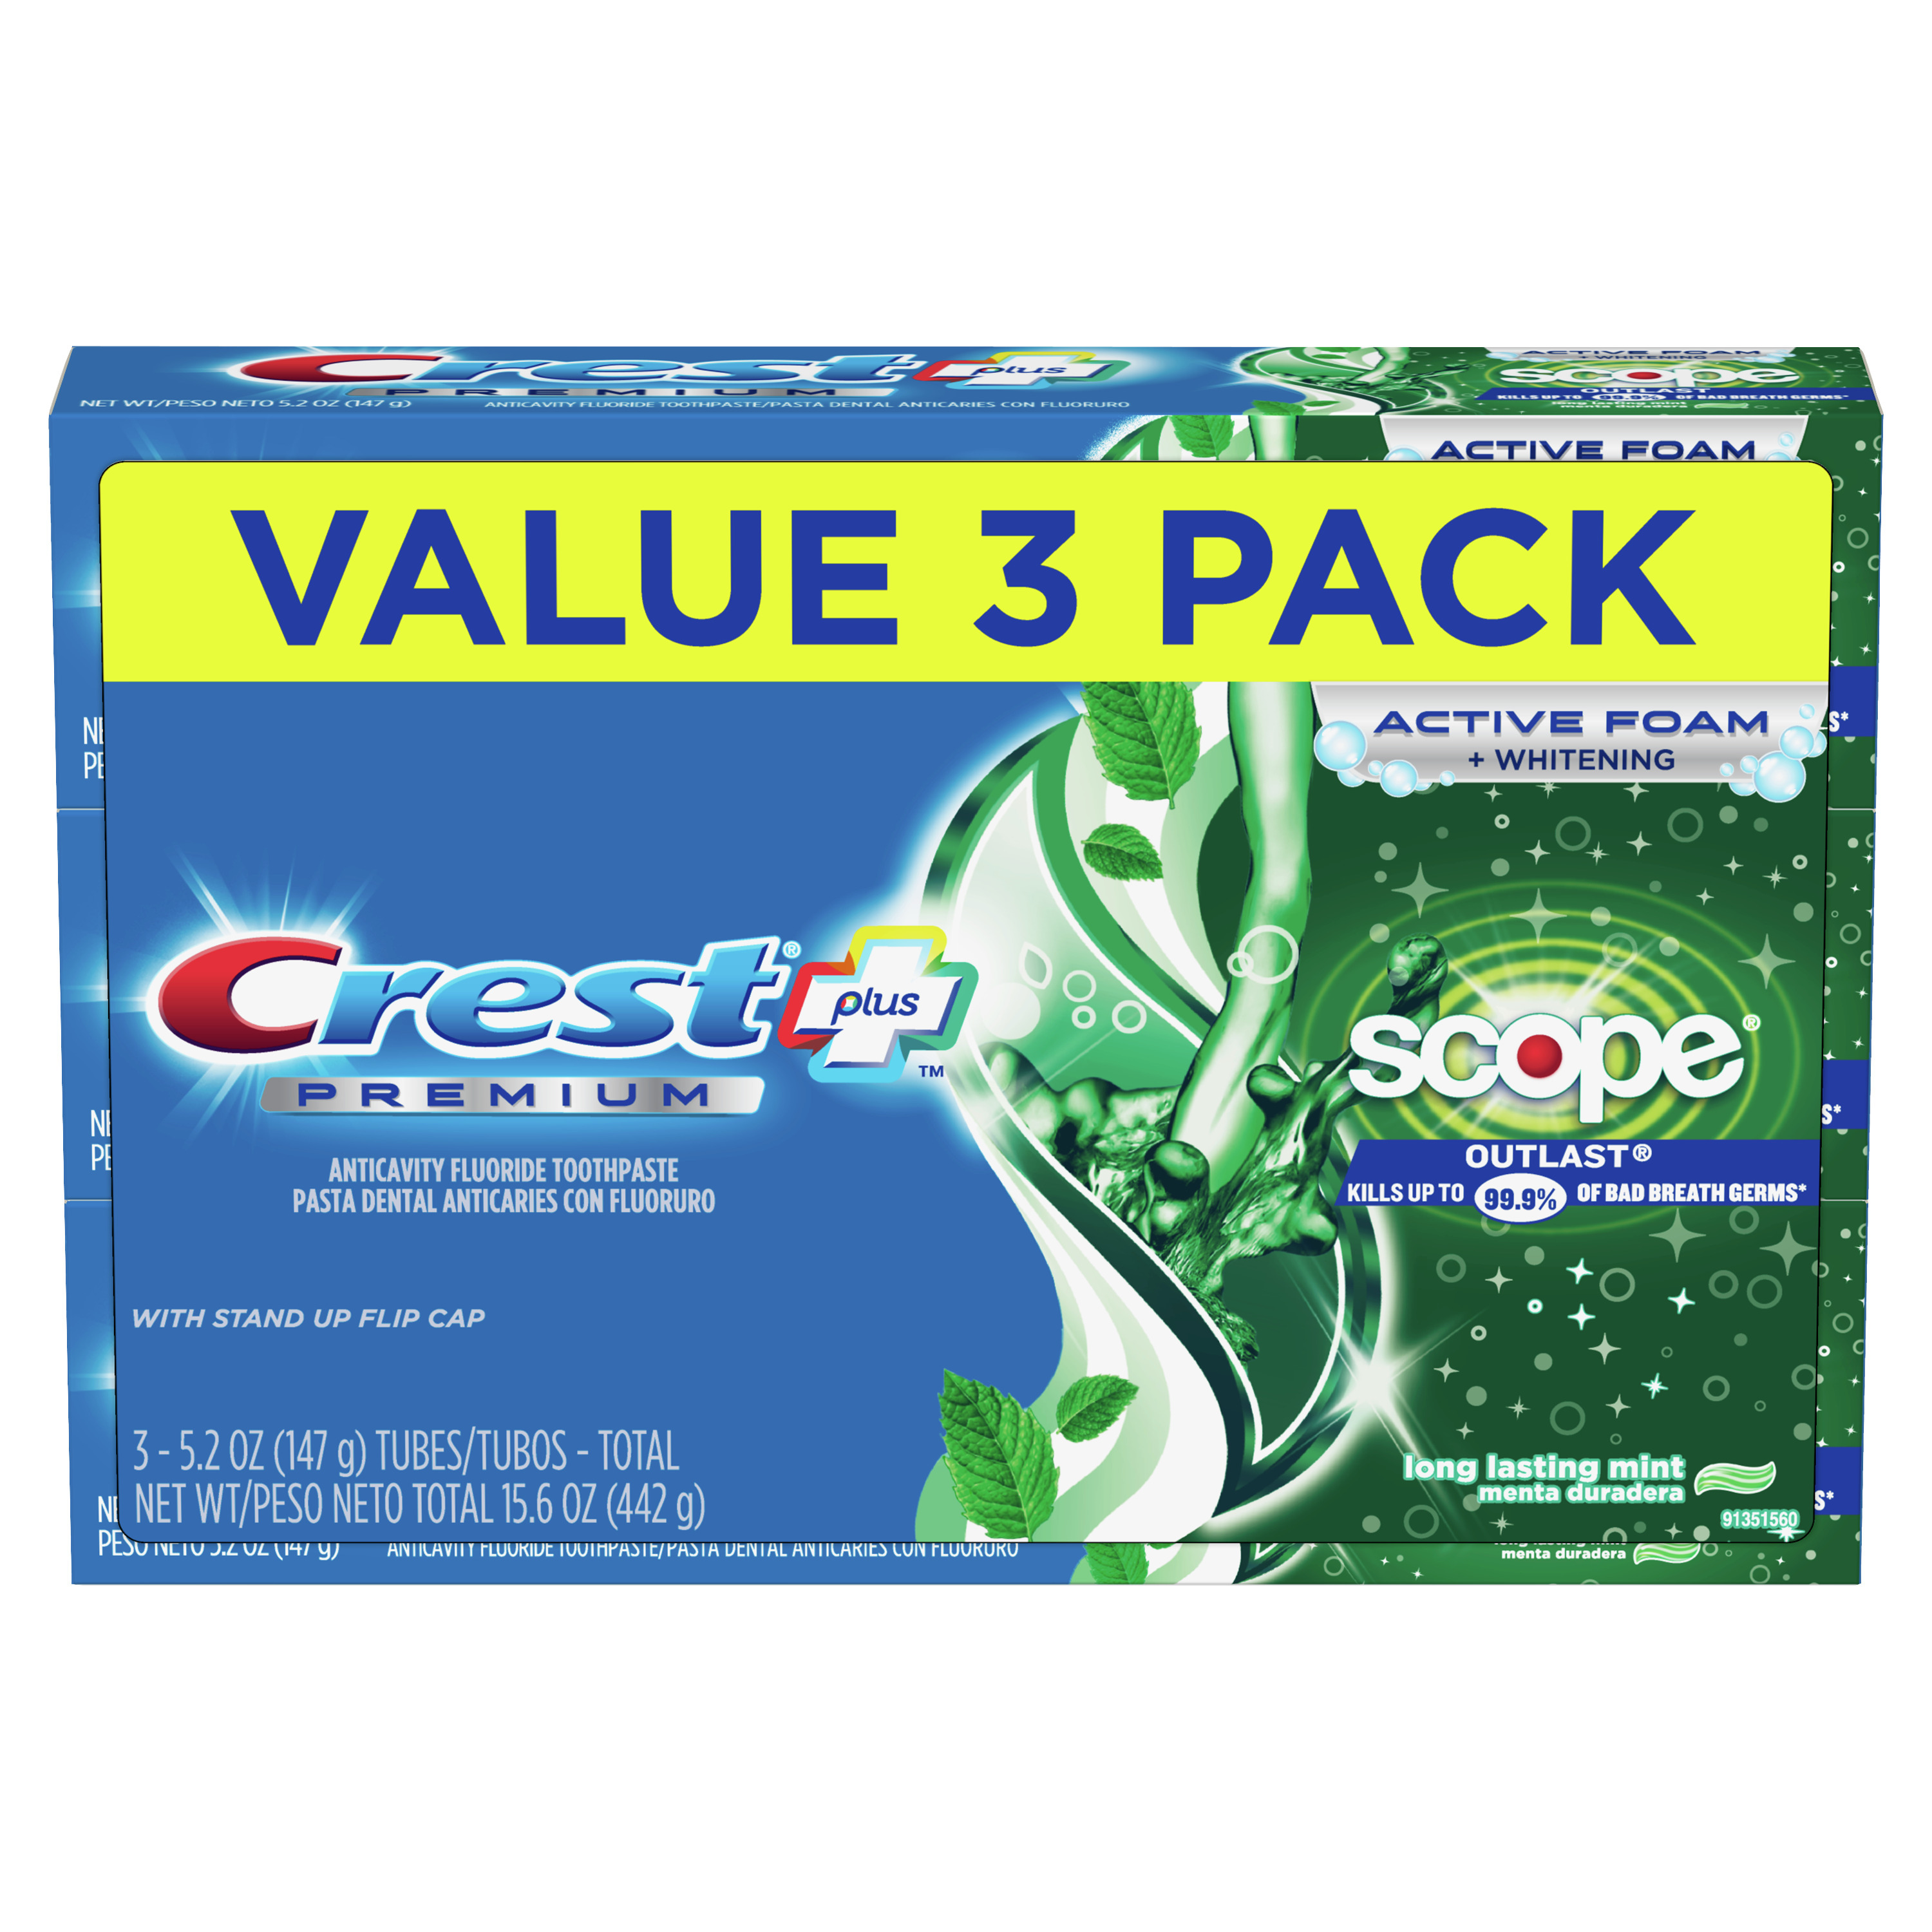 Crest Premium Plus Scope Outlast Toothpaste, Long Lasting Mint Flavor 5.2 oz, Pack of 3 - image 1 of 10